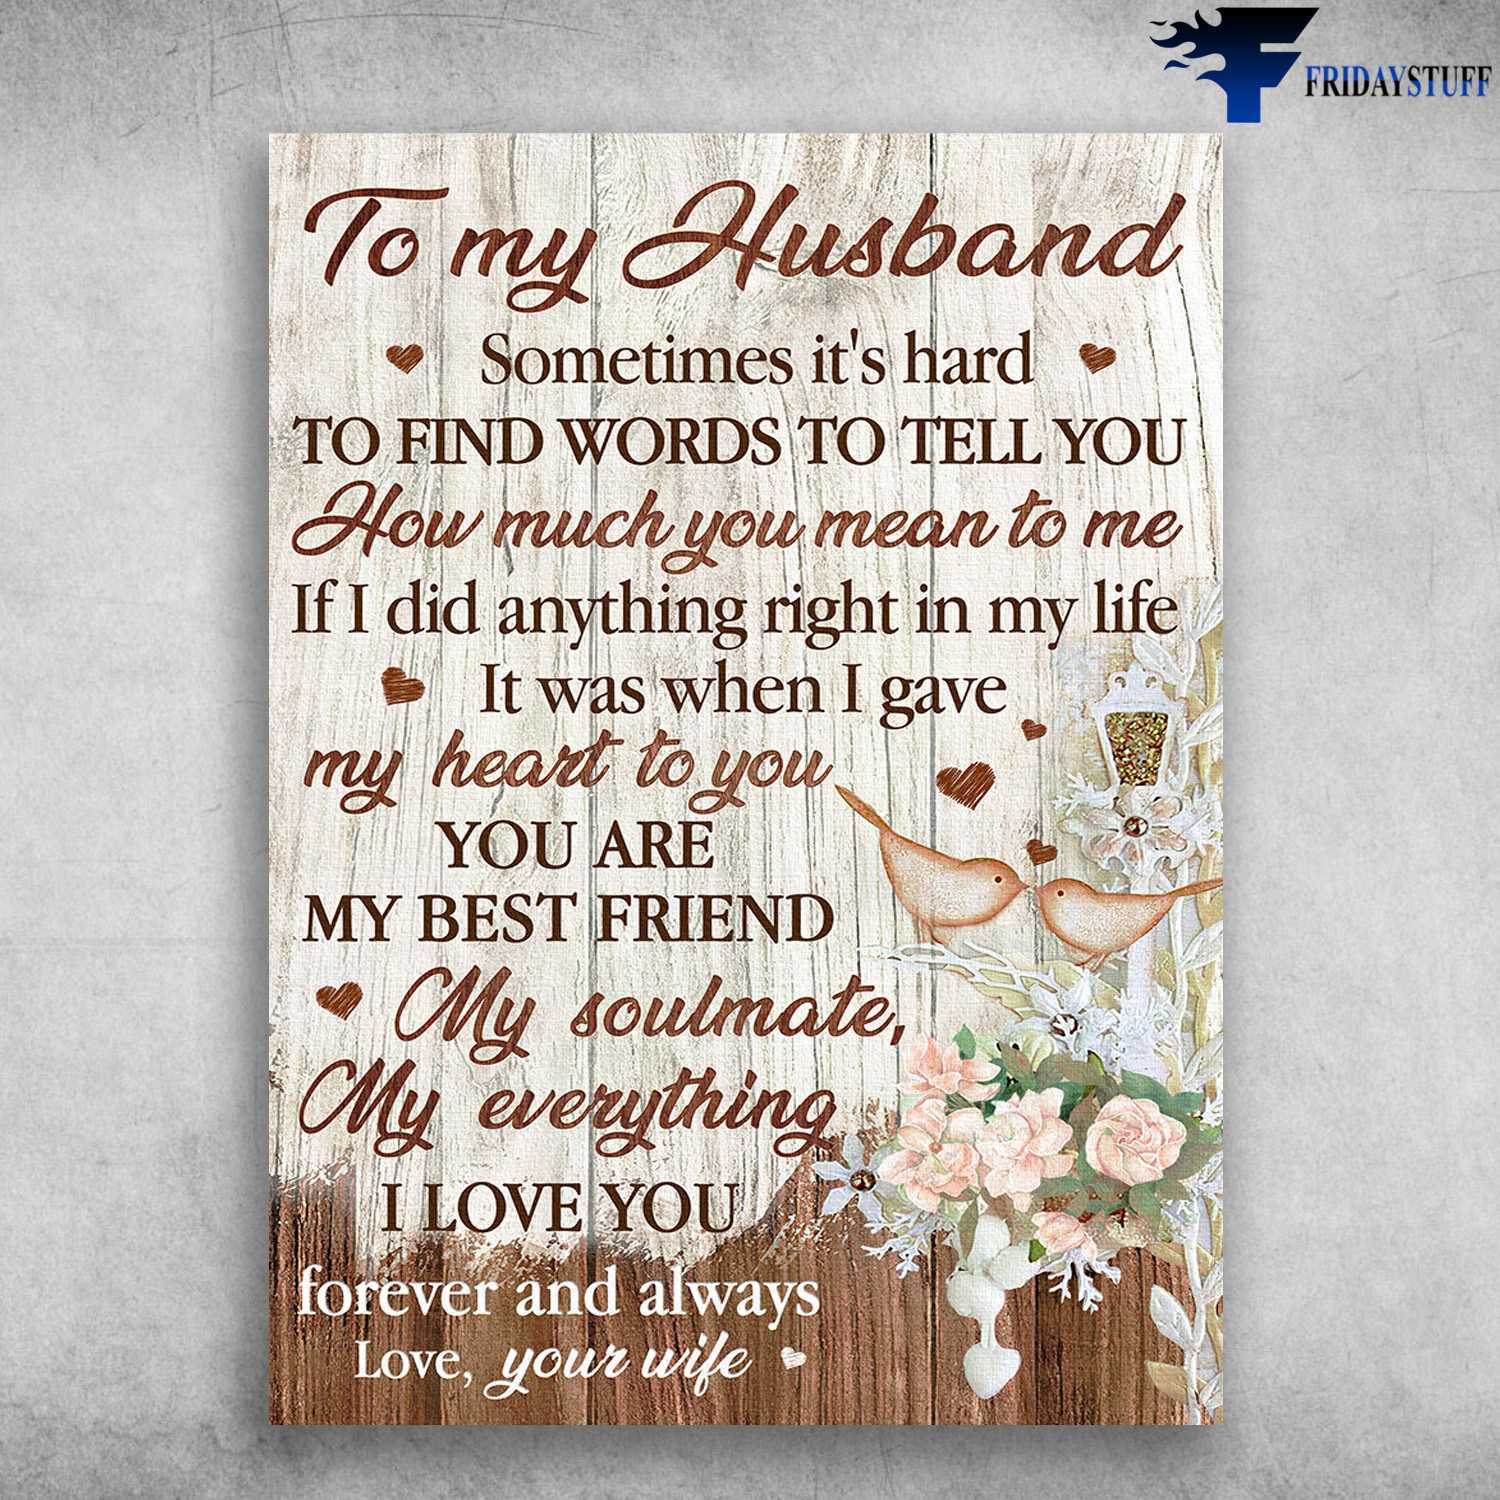 Husband And Wife, To My Husband, Sometimes It's Hard, To Find Words To Tell You, How Much You Mean To Me, If I DId Anything Right In My Life, It Was When I Gave My Heart To You